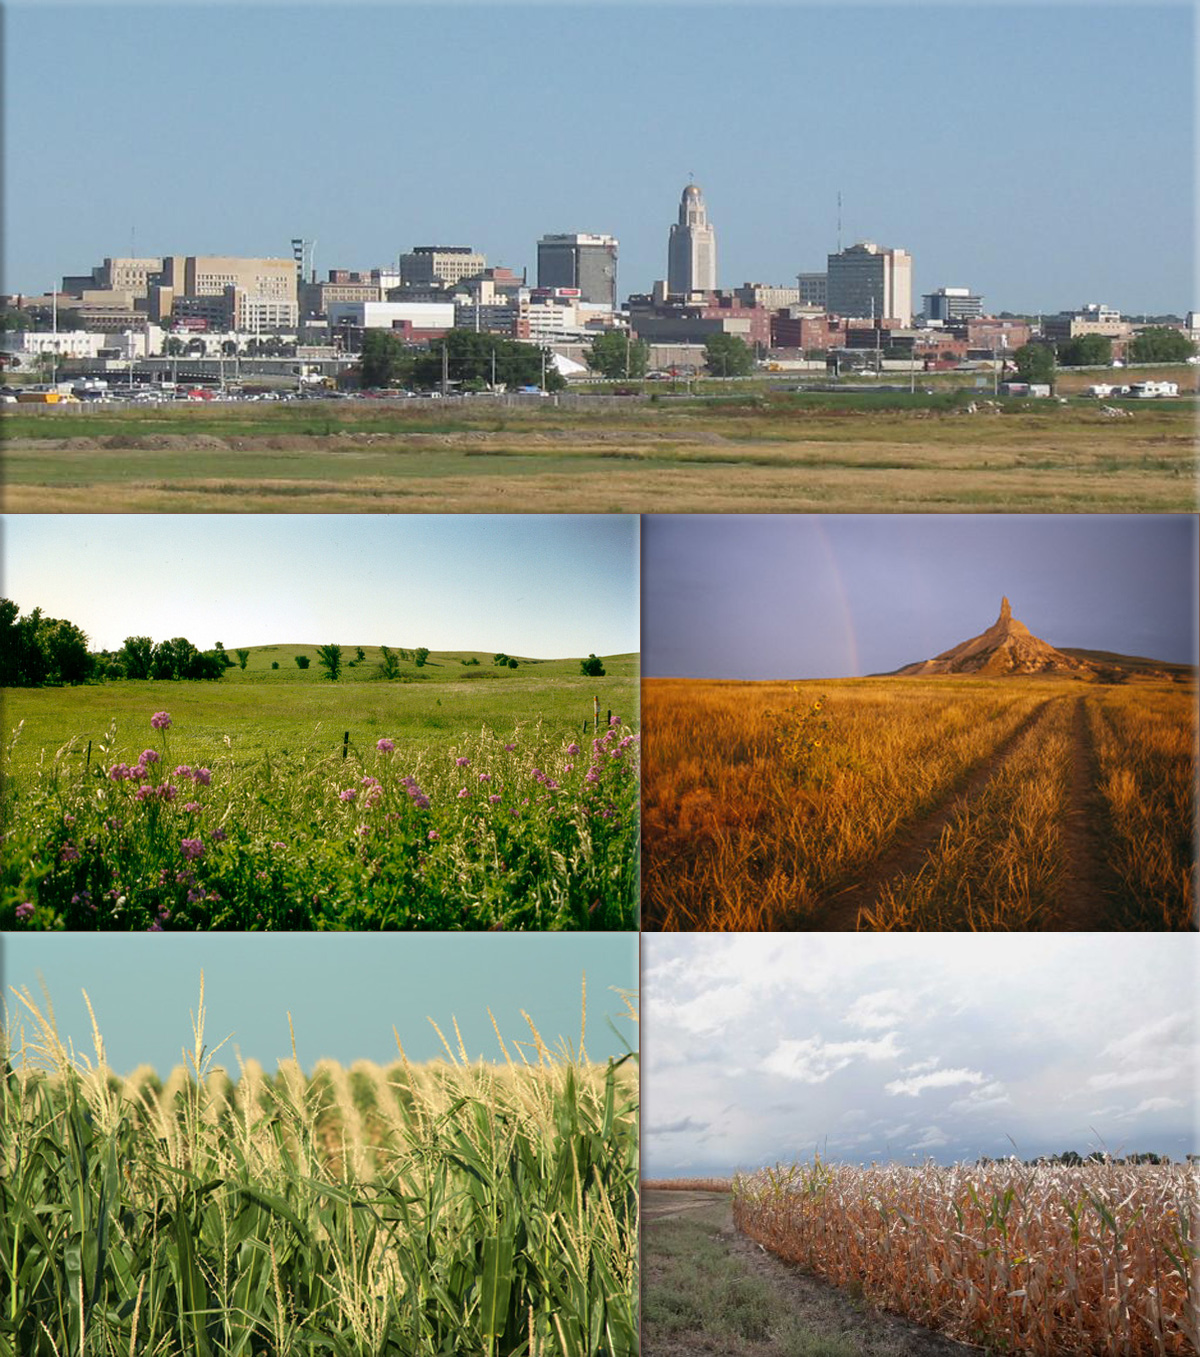 Nebraska is a state on the Great Plains of the Midwestern United States (Its state capital is Lincoln and its largest city is Omaha, on the Missouri River)